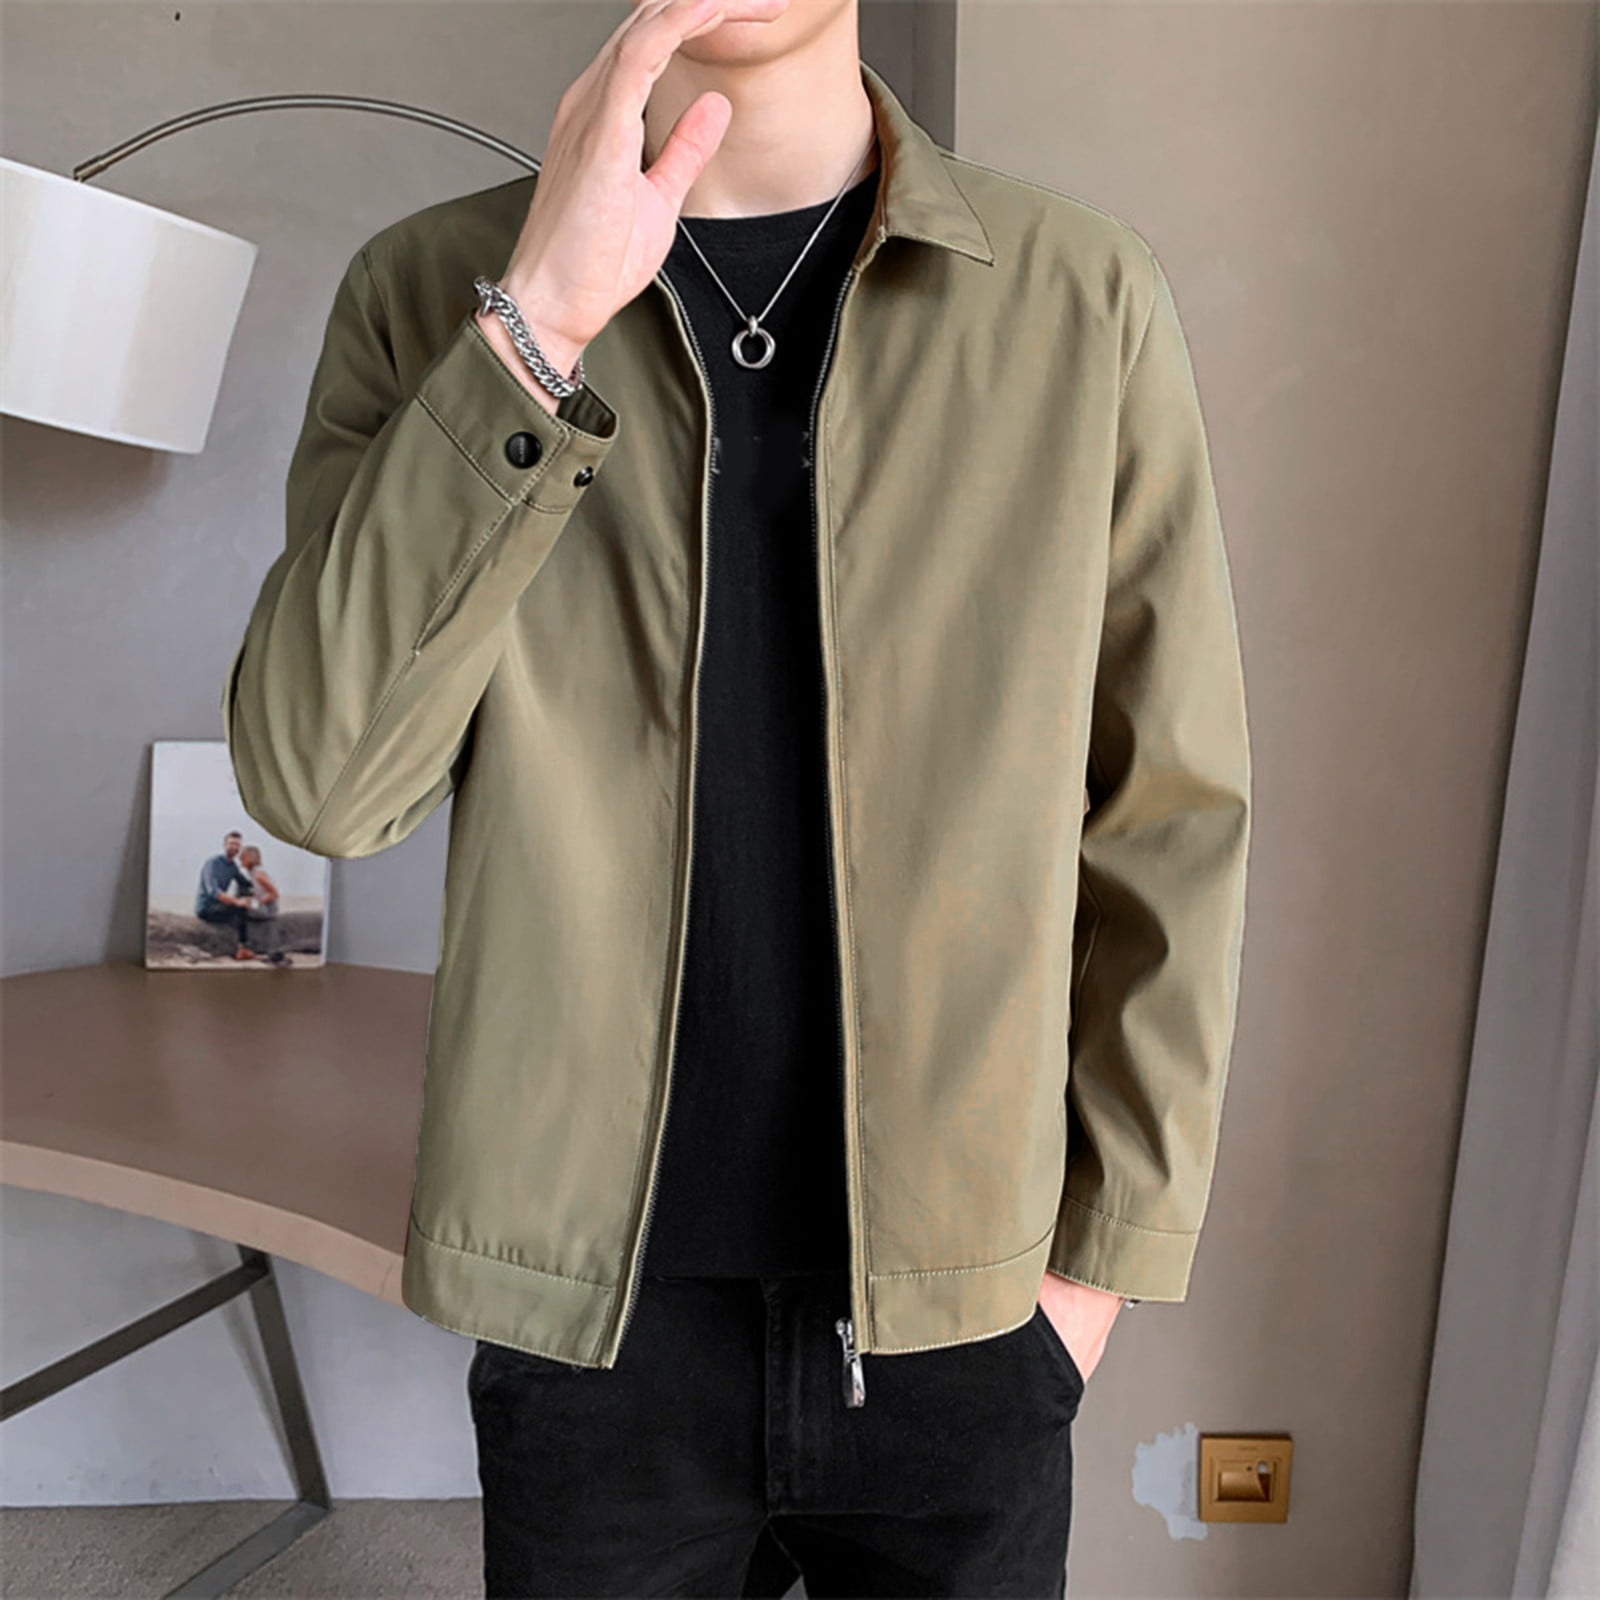 HSMQHJWE Men Waterproof Jacket Foundry Big And Tall Jacket Men Casual Long  Sleeve Autumn Winter Stand Neck Top Blouse Coat Jacket With Pockets Mens